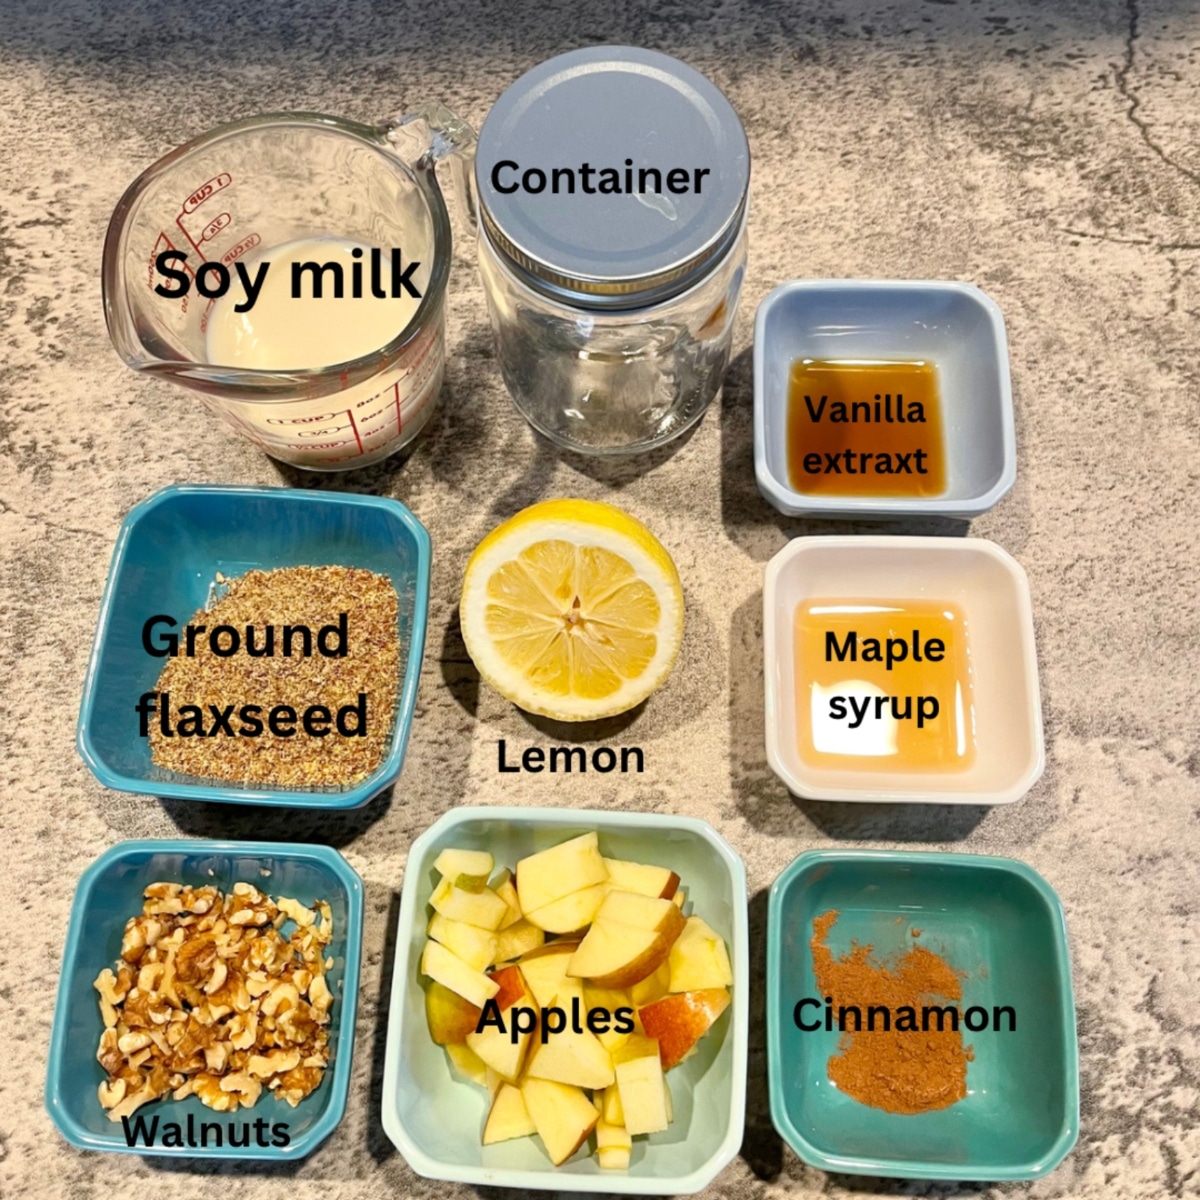 A picture showing what is needed for flaxseed pudding, which includes: soy milk, a container, vanilla extract, ground flaxseed, lemon, maple syrup, walnuts, apples, and cinnamon.  Each ingredients is in a small dish atop a gray countertop.